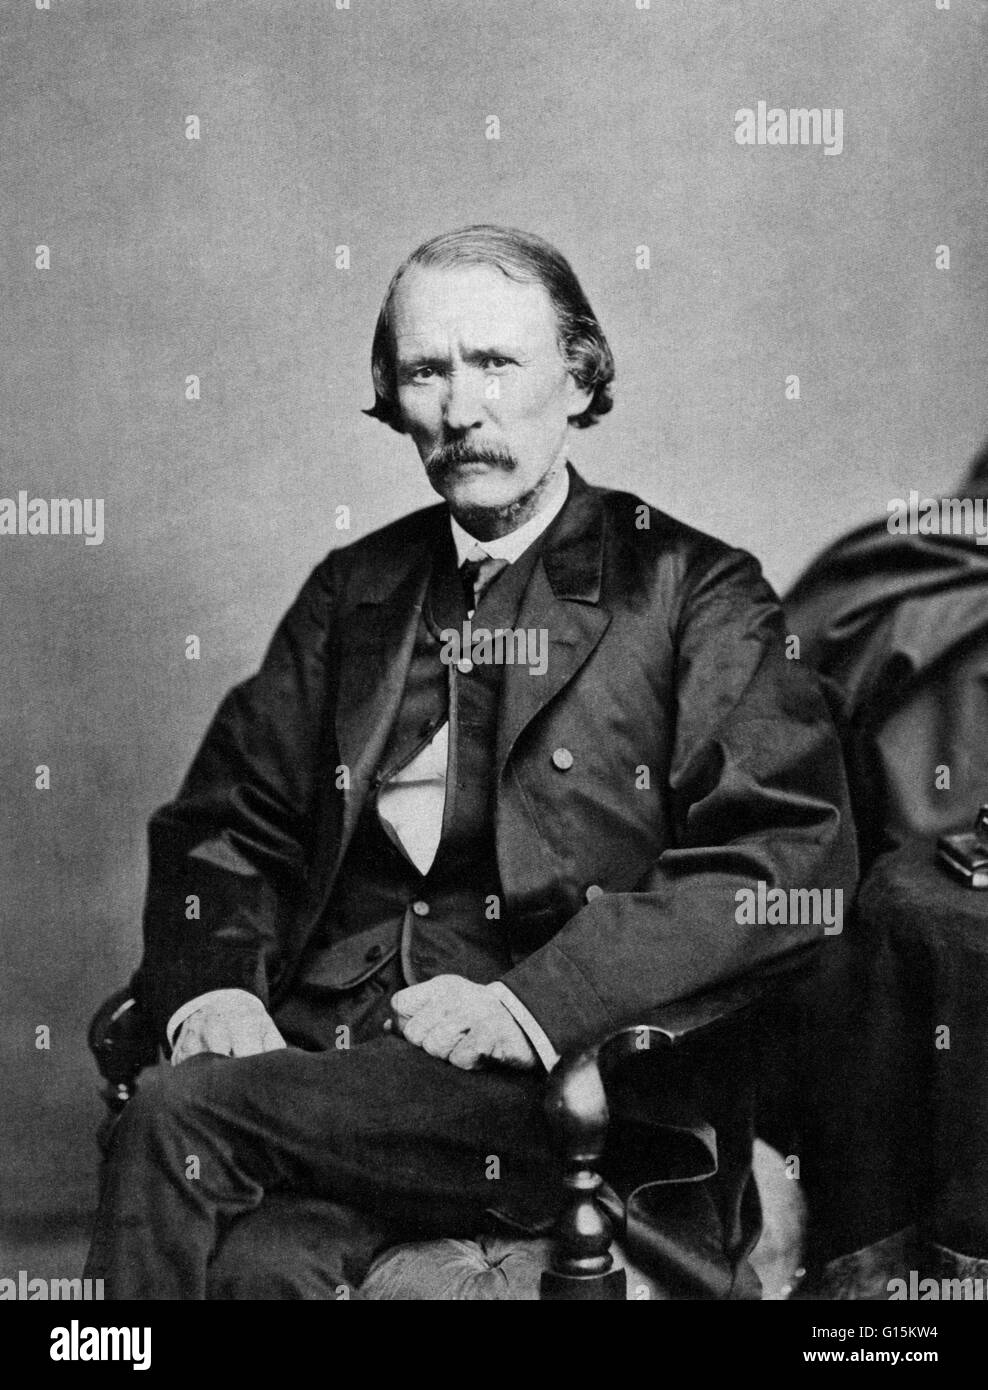 This was the last picture taken of Christopher Houston Carson (December 24, 1809 - May 23, 1868), known as Kit Carson, was an American trailblazer and Indian fighter. He left home at age 16 and became a mountain man and trapper in the West. He explored th Stock Photo